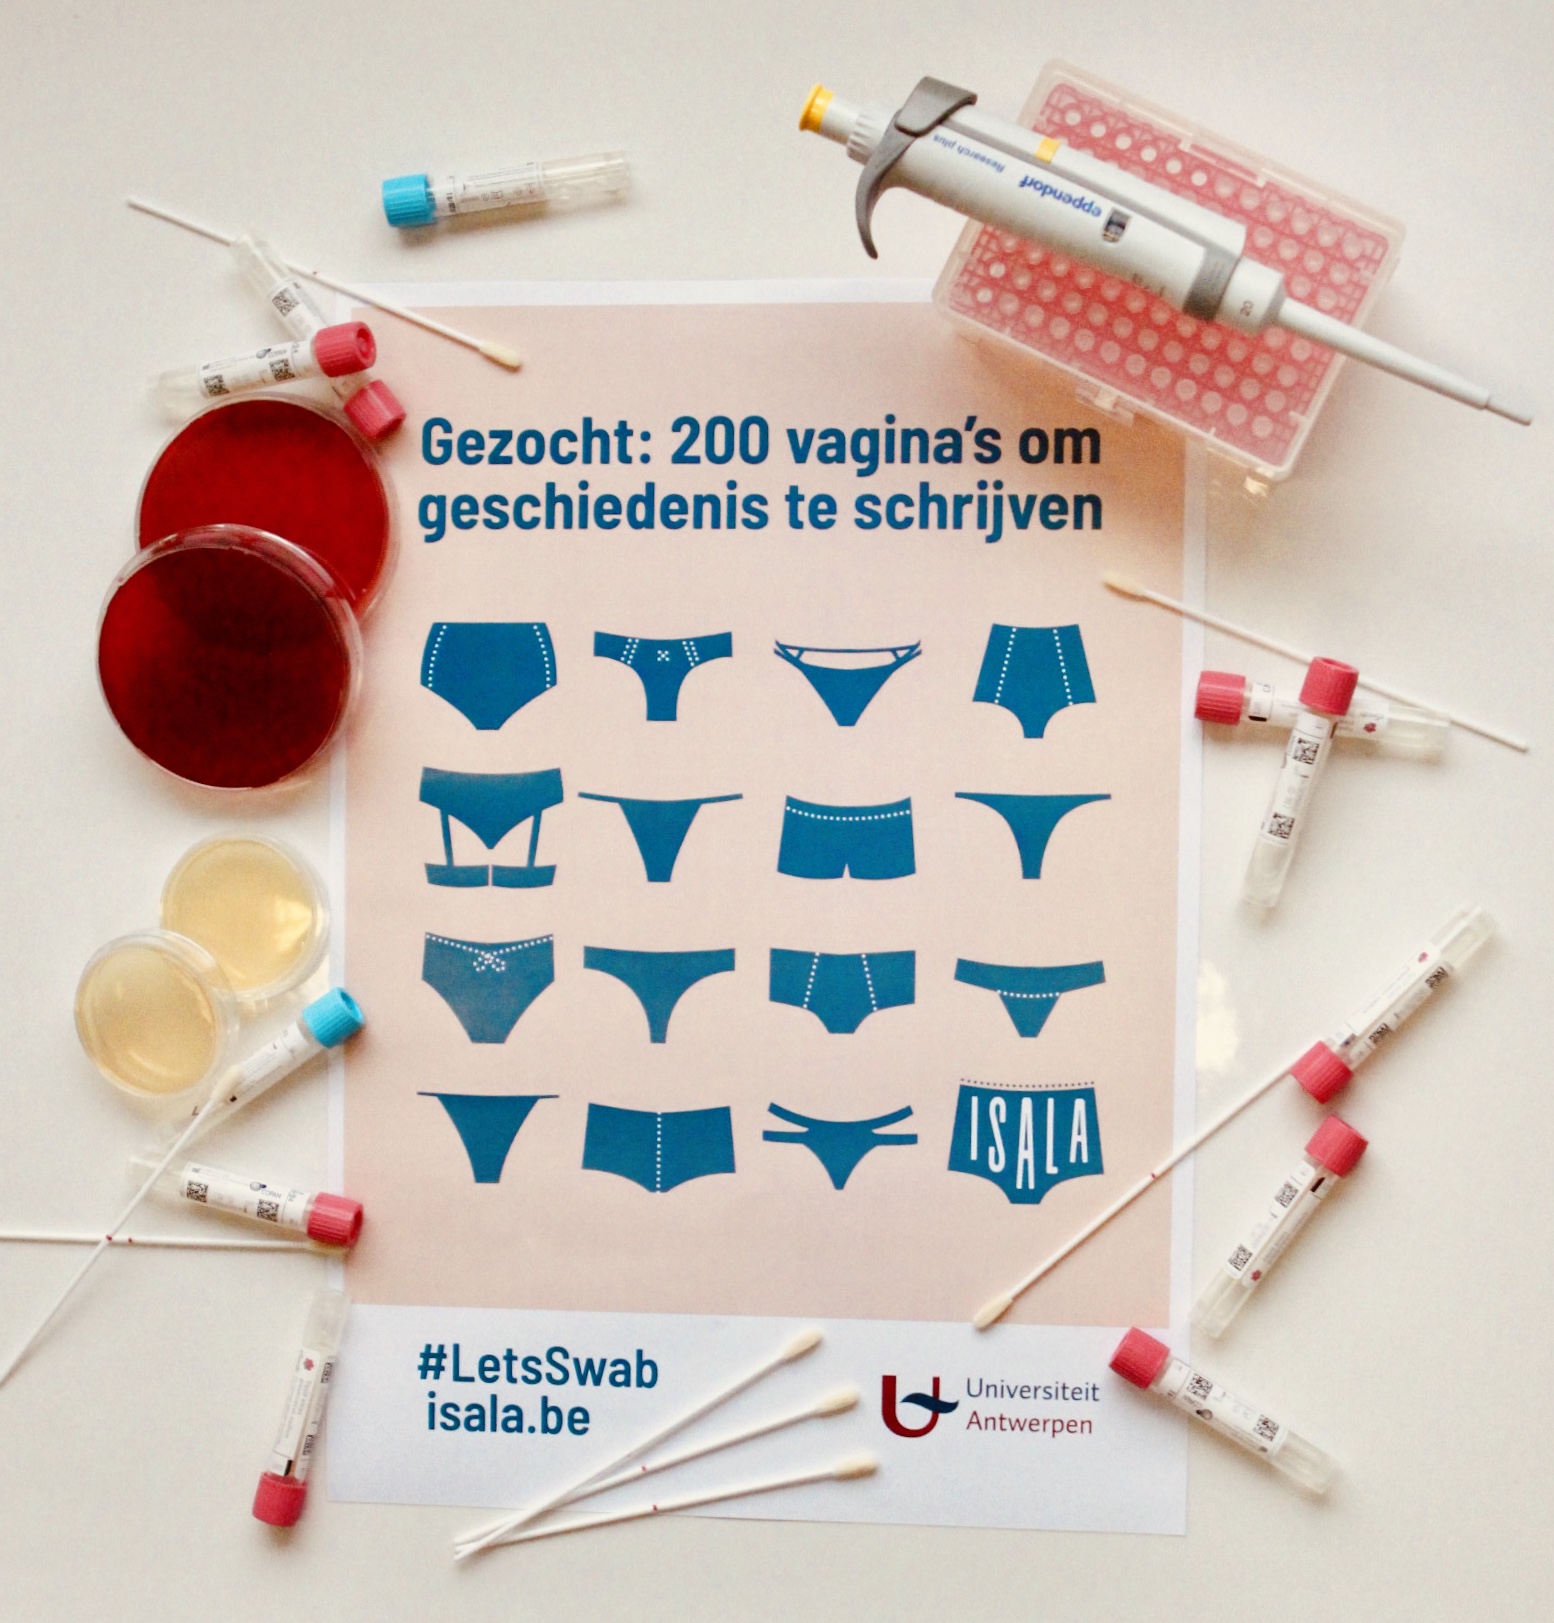 Isala self-sampling kit from the longitudinal flow (sampling vagina, skin and saliva over 2 menstrual cycles), from the citizen science initiative Isala: Citizen-science map of the vaginal microbiome, 2023 Grand Prize Winner of the European Union Prize for Citizen Science.